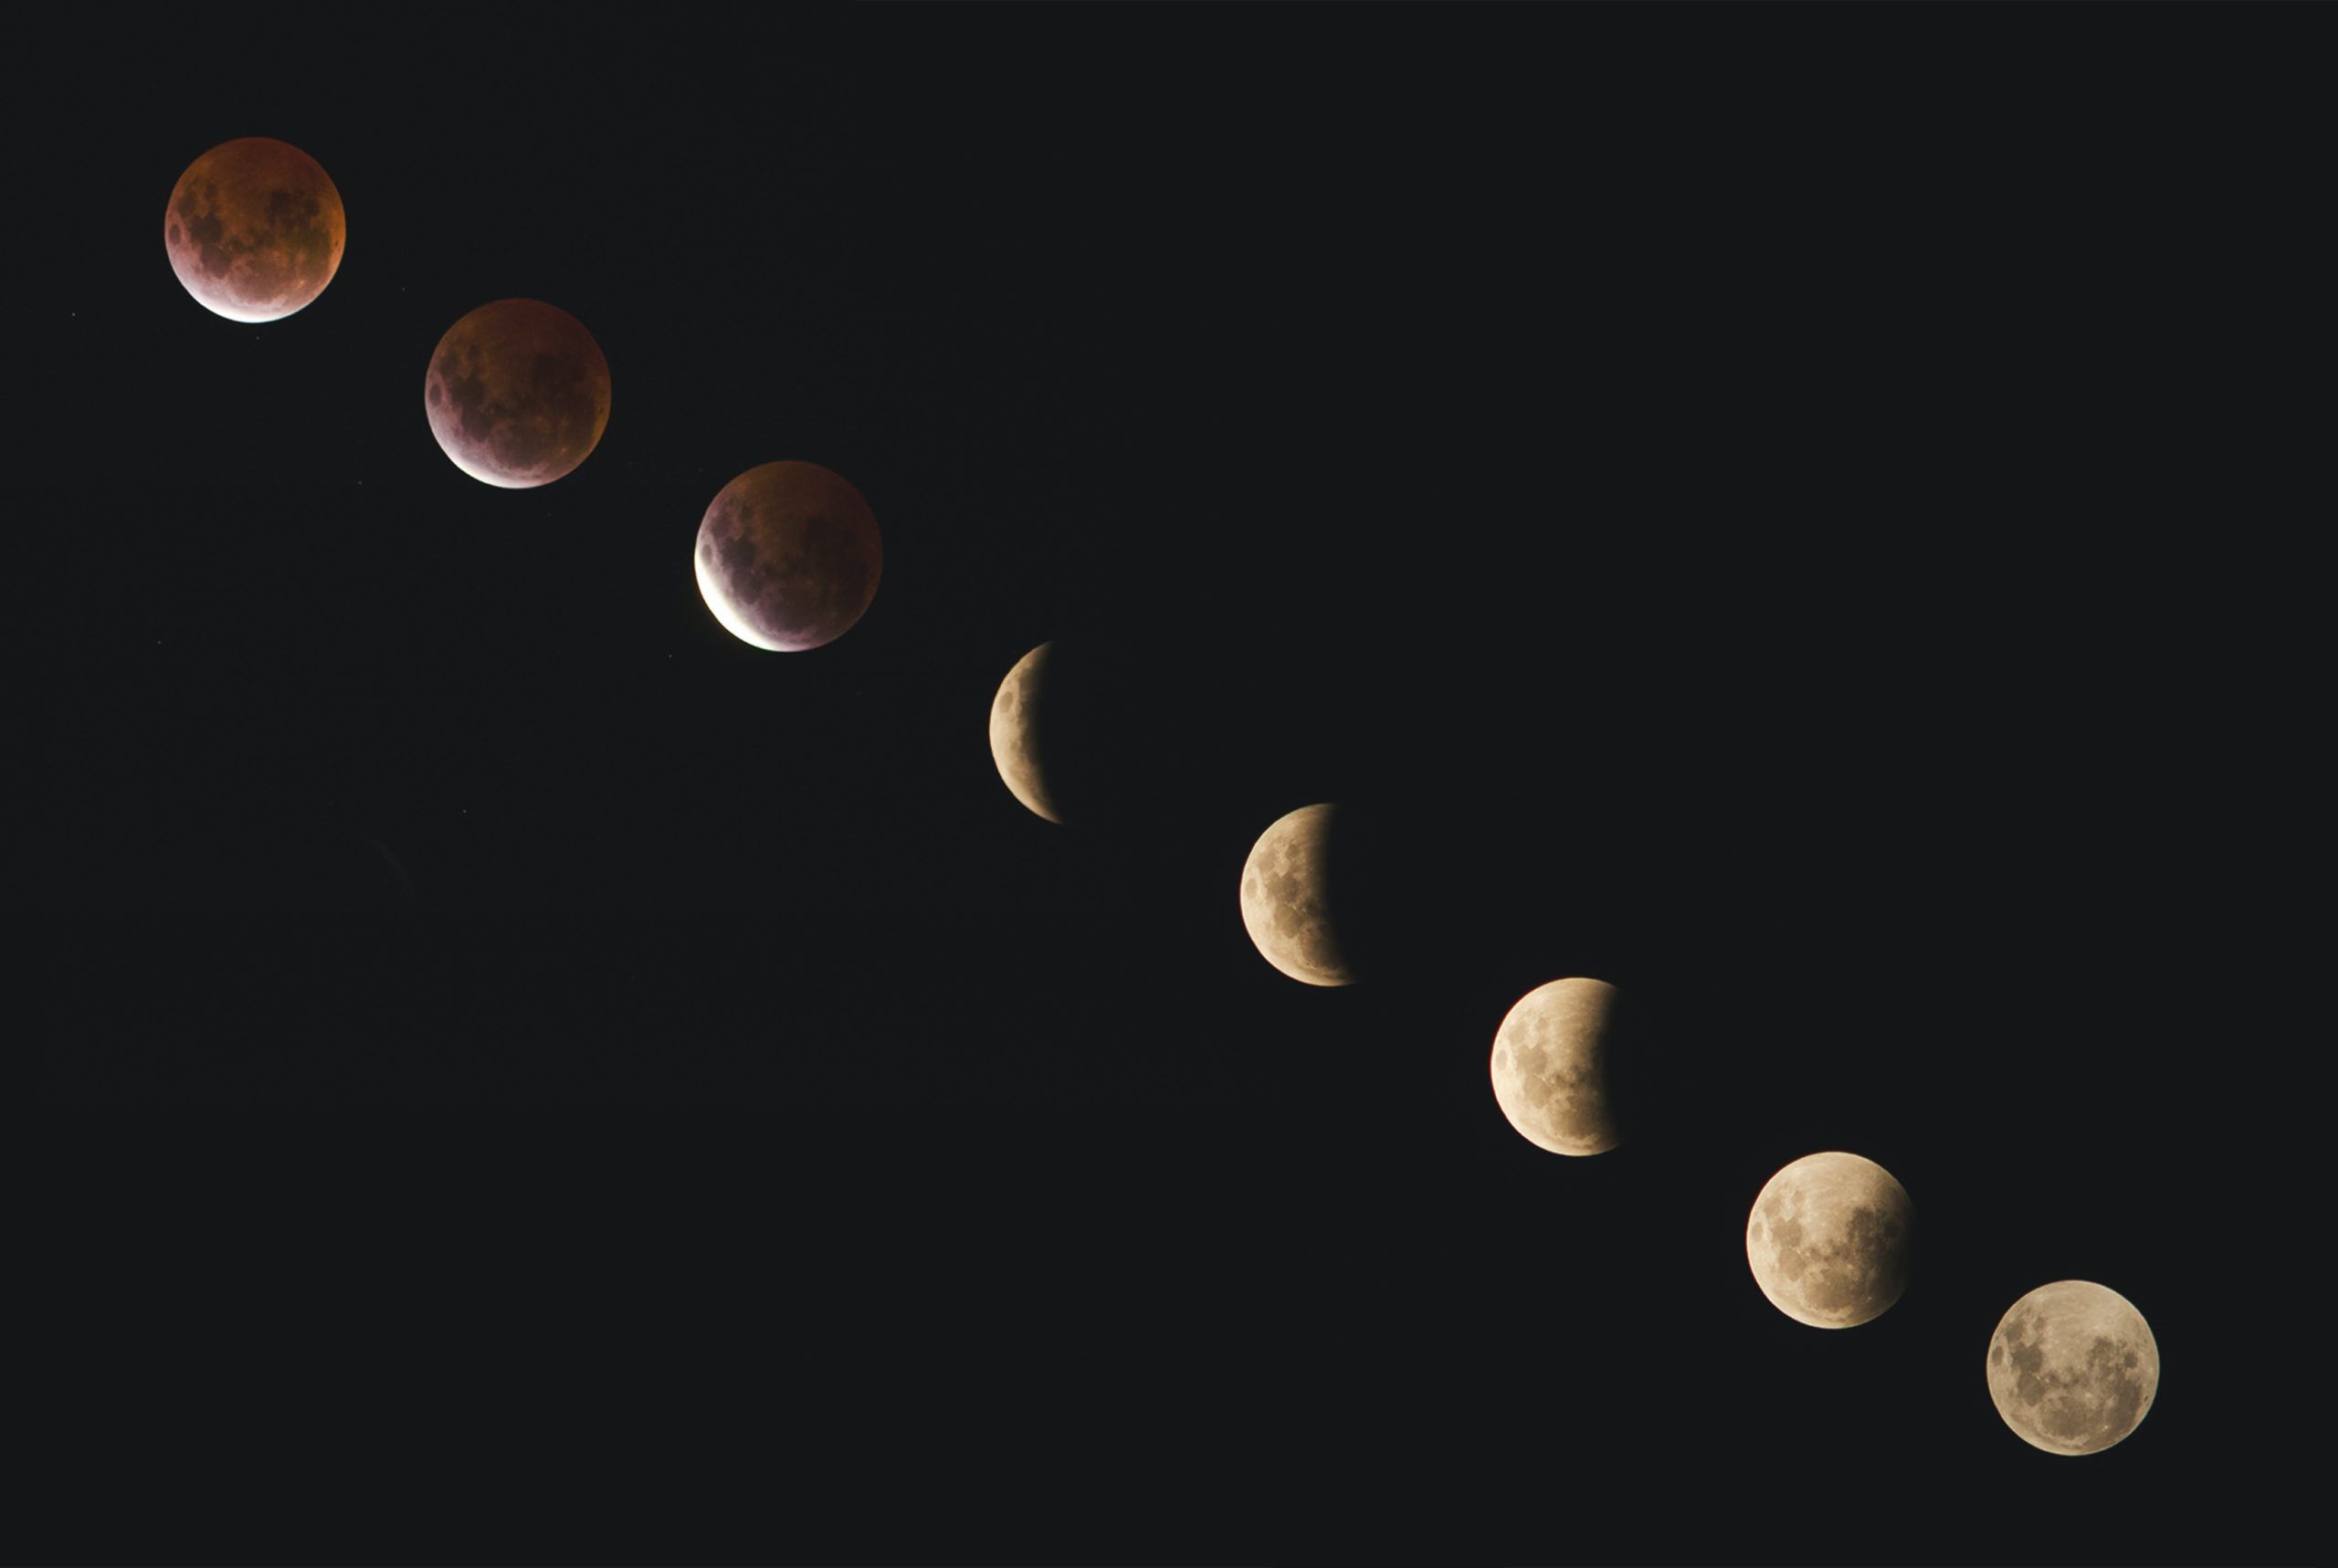 A series of photographs of the moon during a lunar eclipse - Moon phases